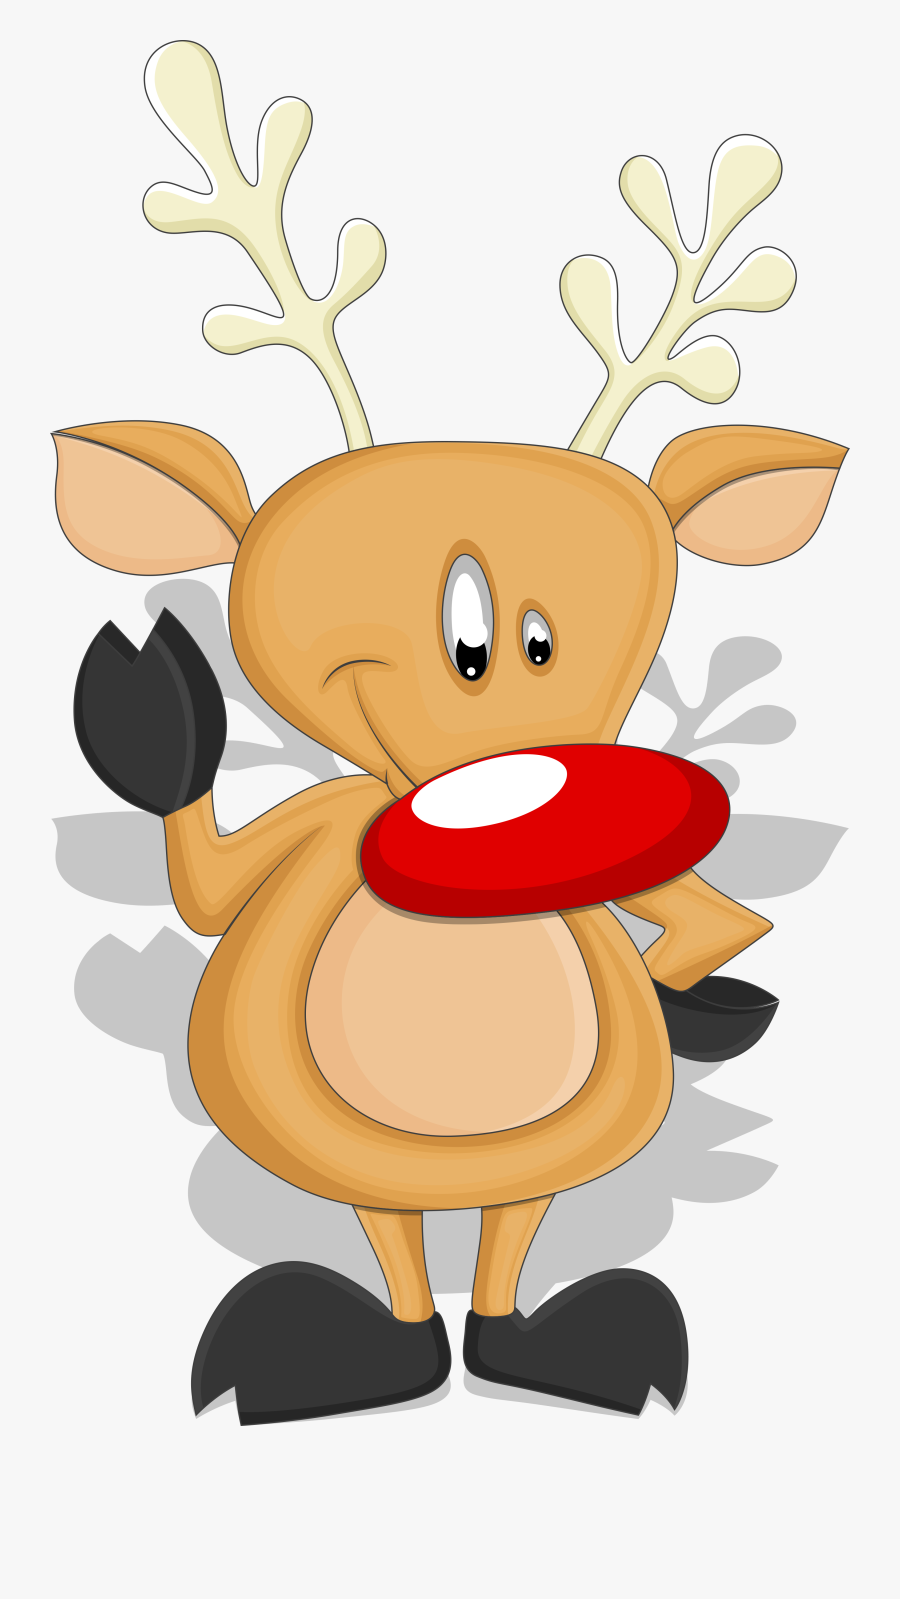 Reindeer Christmas Characters Png, Transparent Clipart